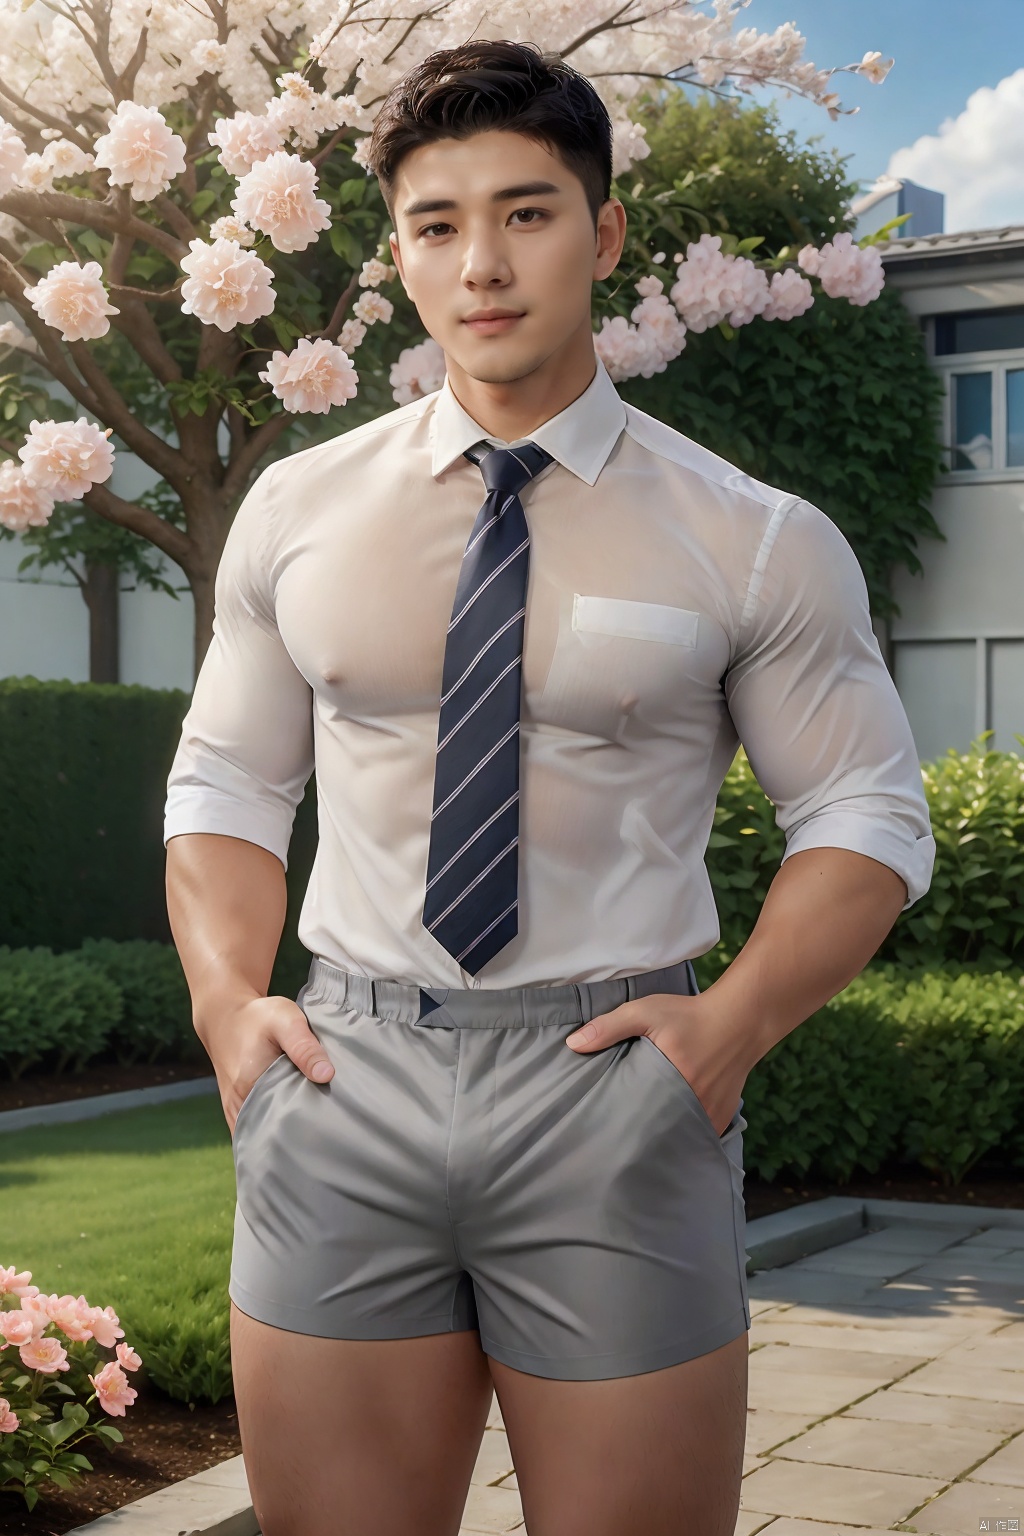  masterpiece,1 boy,Young,Handsome,Look at me,Short hair,Tea hair,Students,White shirt,Striped tie,Gray shorts,Stand,Outdoor,Garden,Peach tree,Flying petals,Light and shadow,HDR,textured skin,super detail,best quality, CodeMan001, SaSangAAA